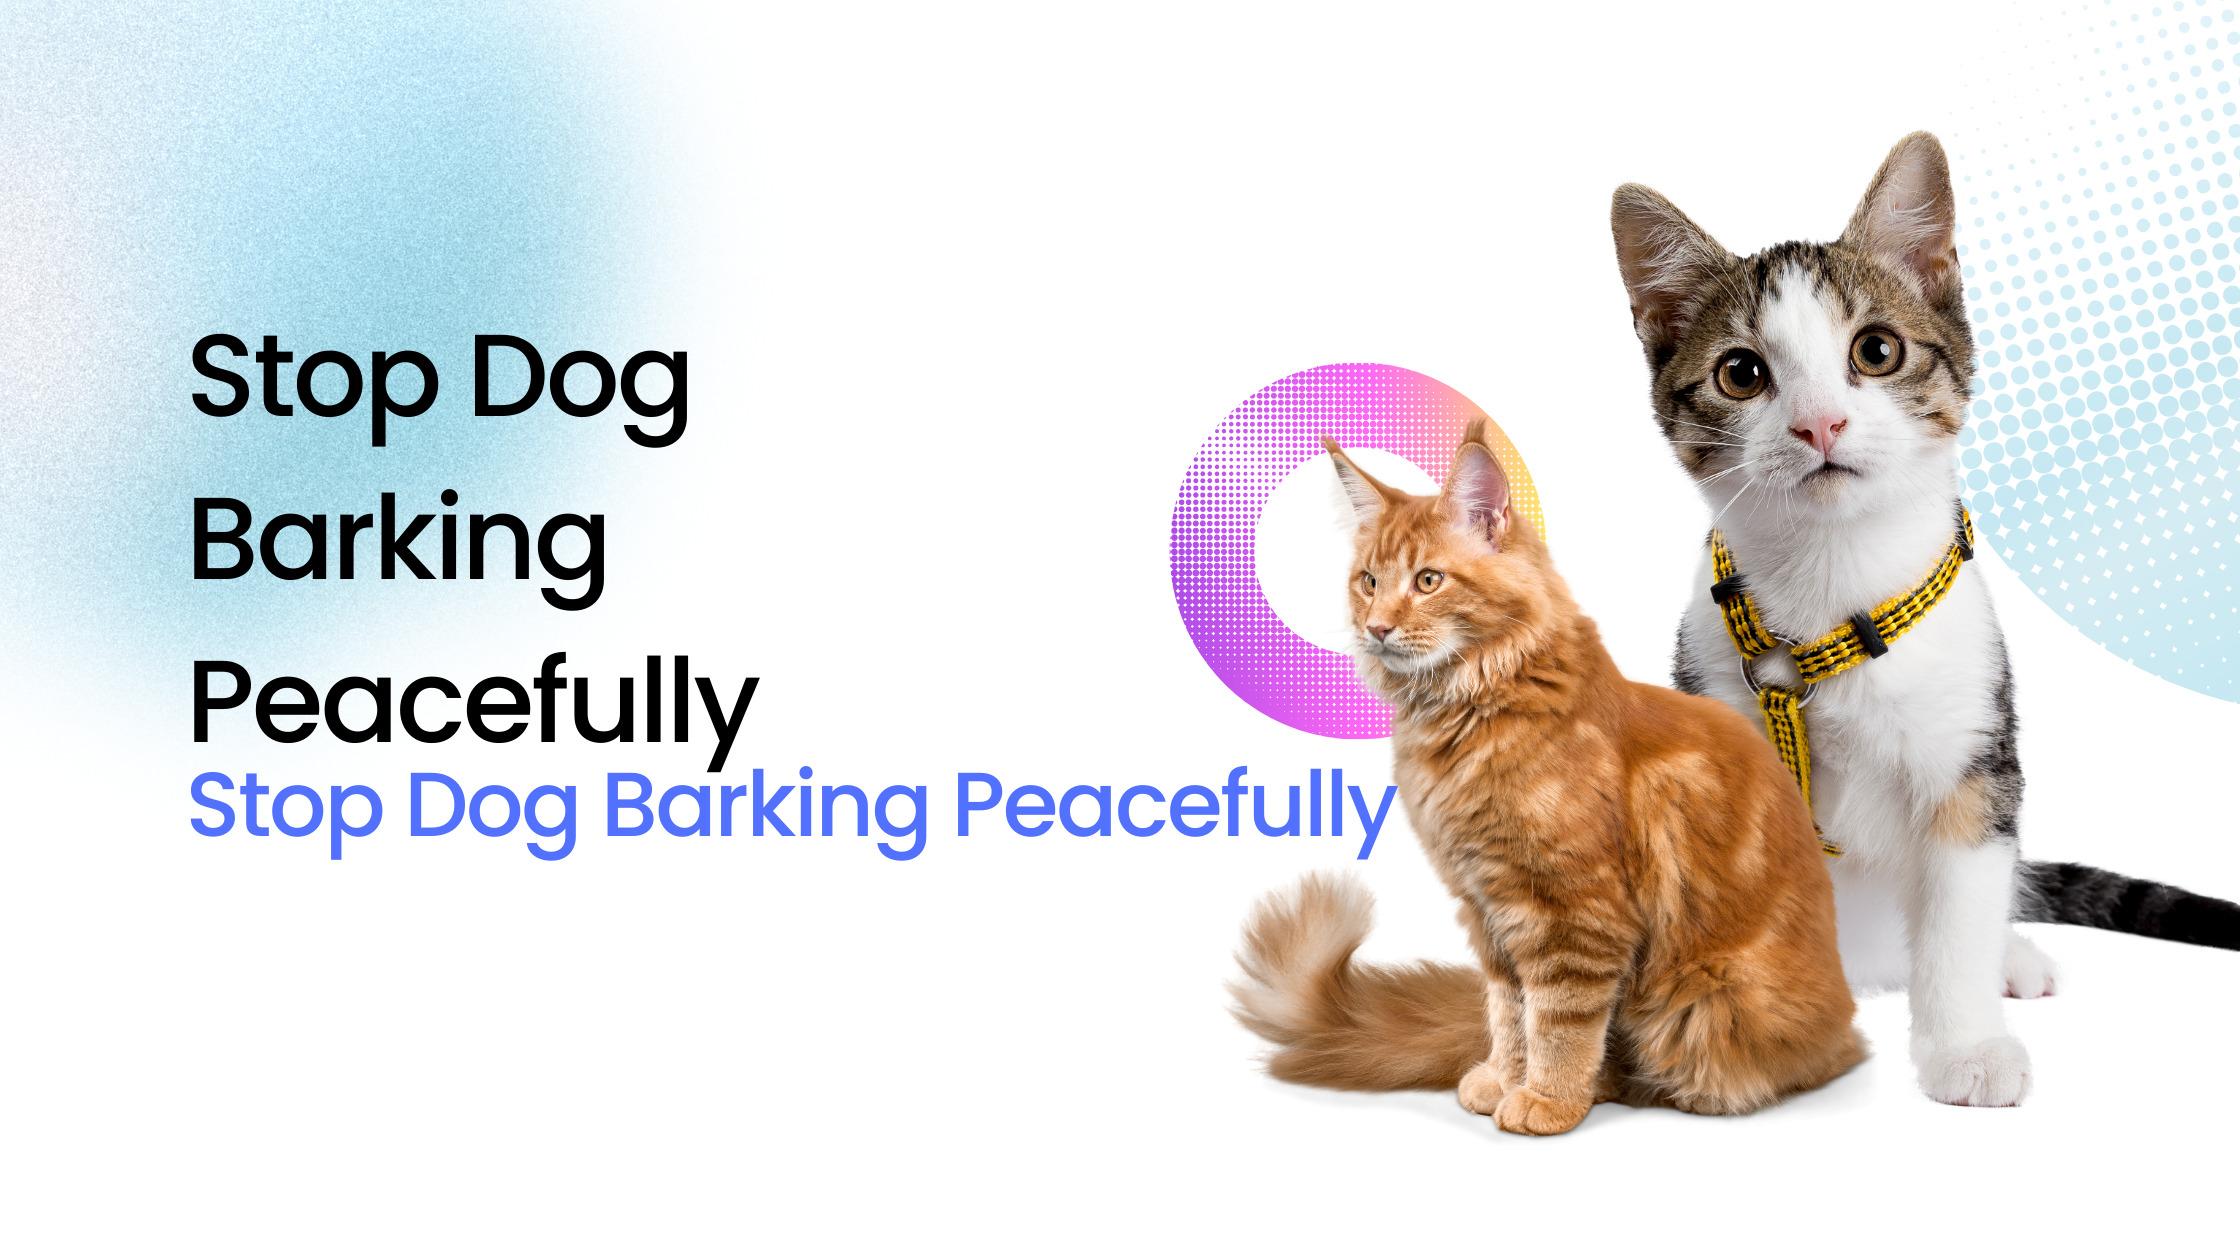 Stop Dog Barking: Silence, Please! Tips for Peaceful Living